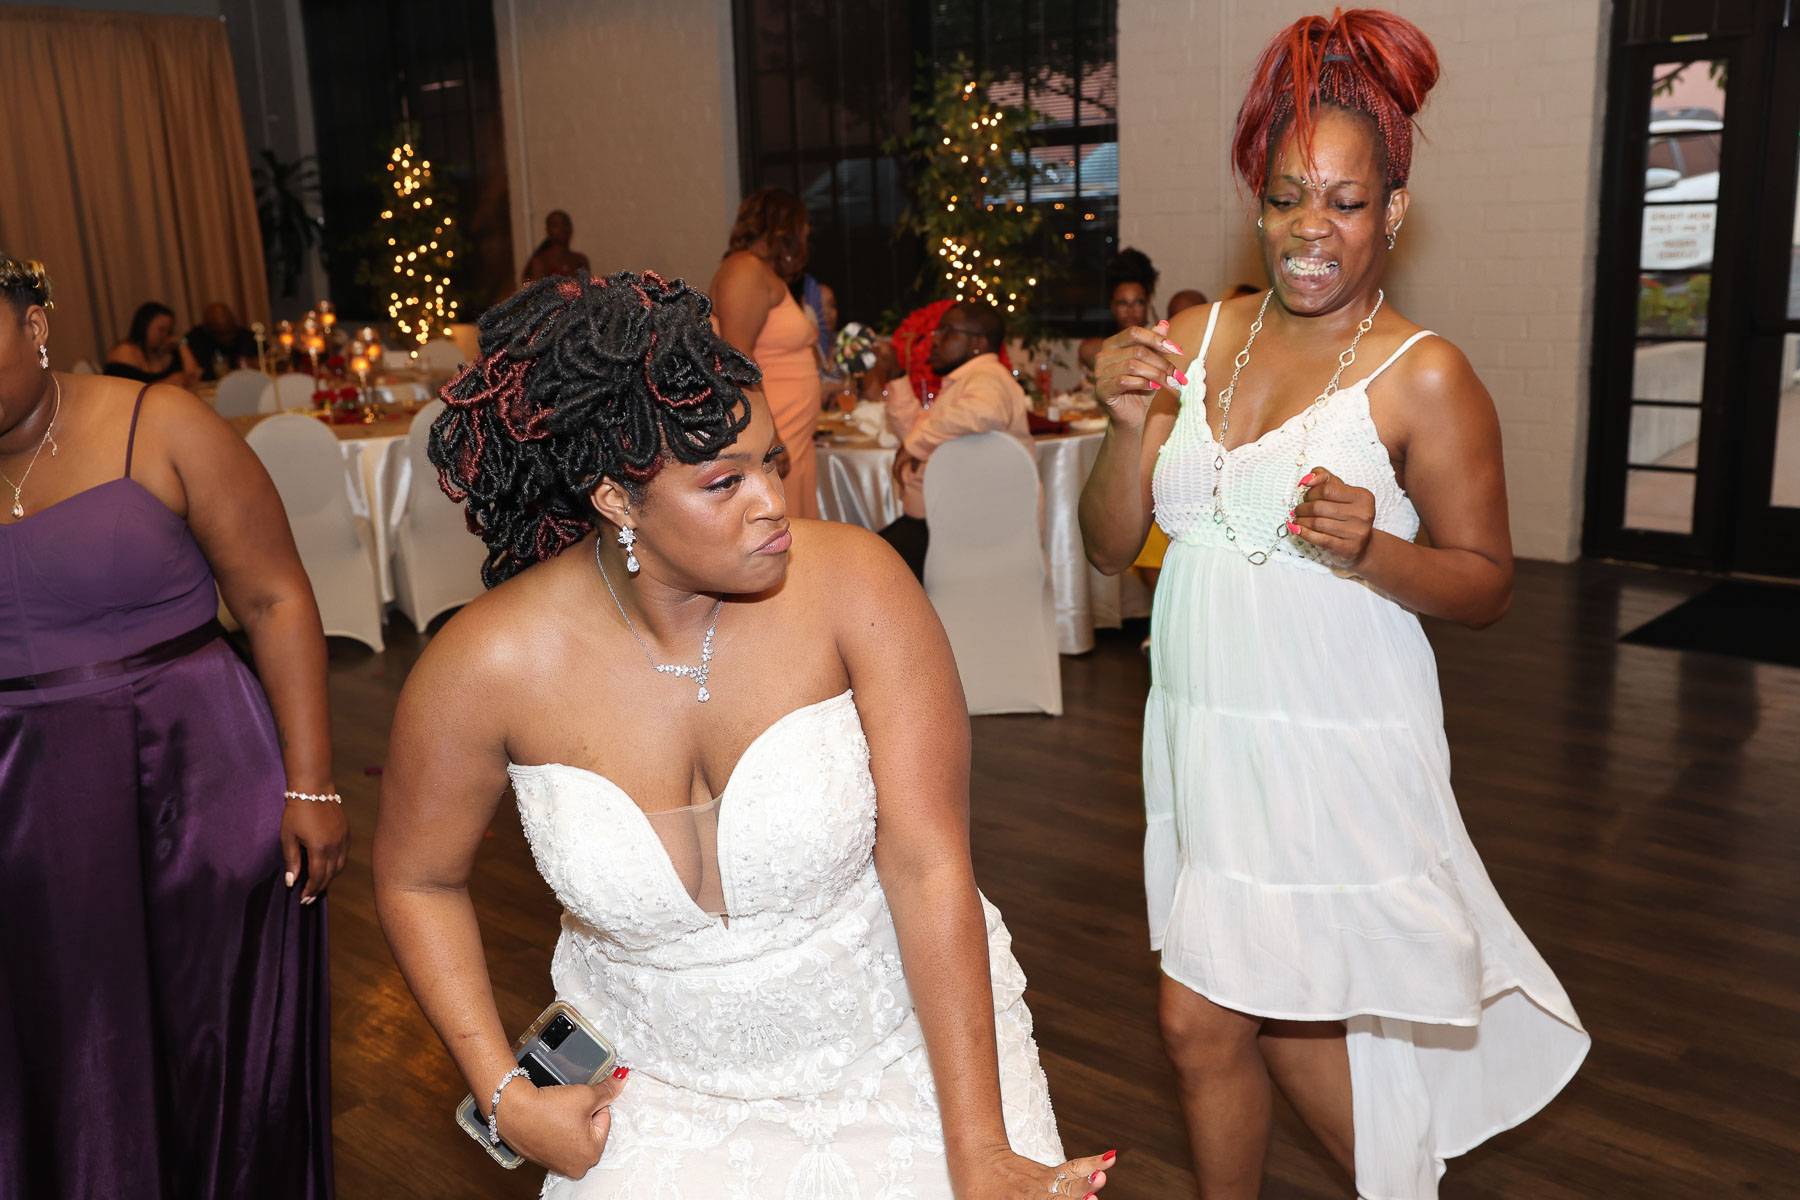 The bride with a guest dancing beside her